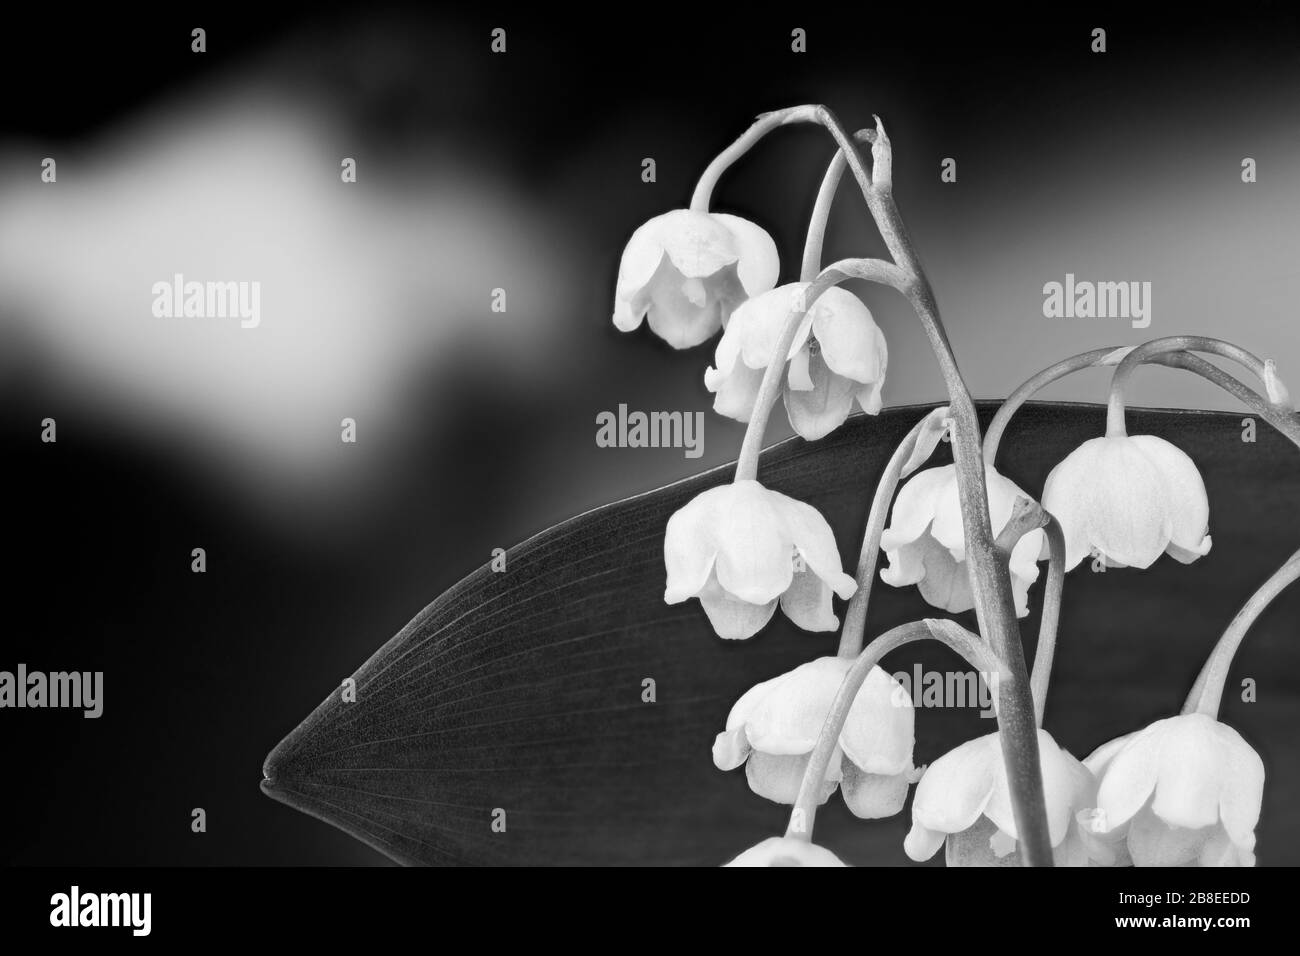 Delicate lily of the valley flowers closeup on spring black and white sky. Convallaria majalis. Romantic may bells blooms in natural melancholy scene. Stock Photo